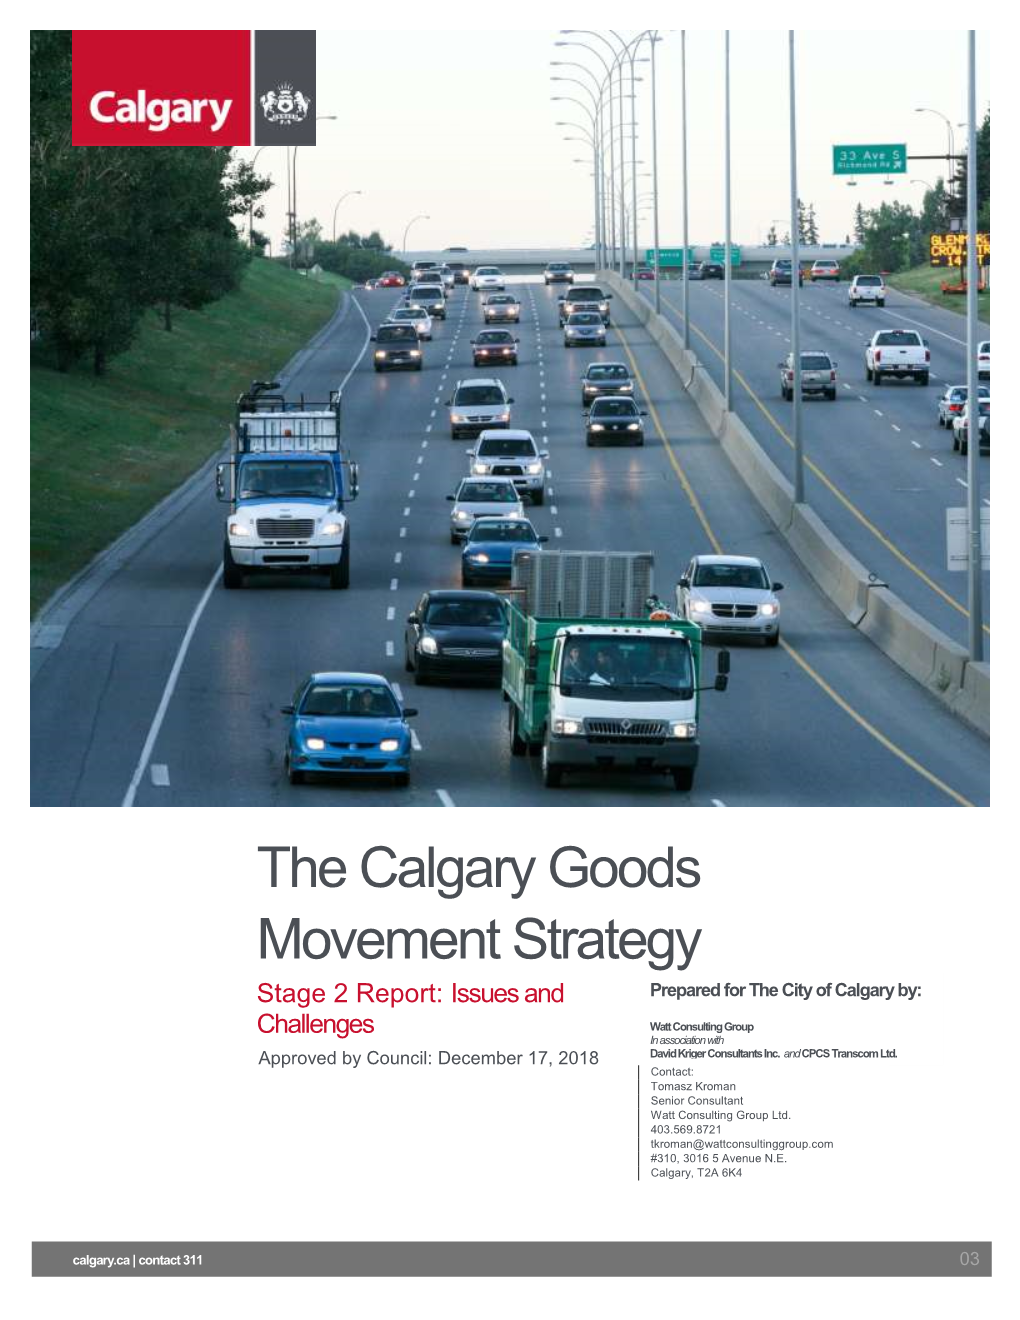 The Calgary Goods Movement Strategy Prepared by Watt Consulting Group Ltd